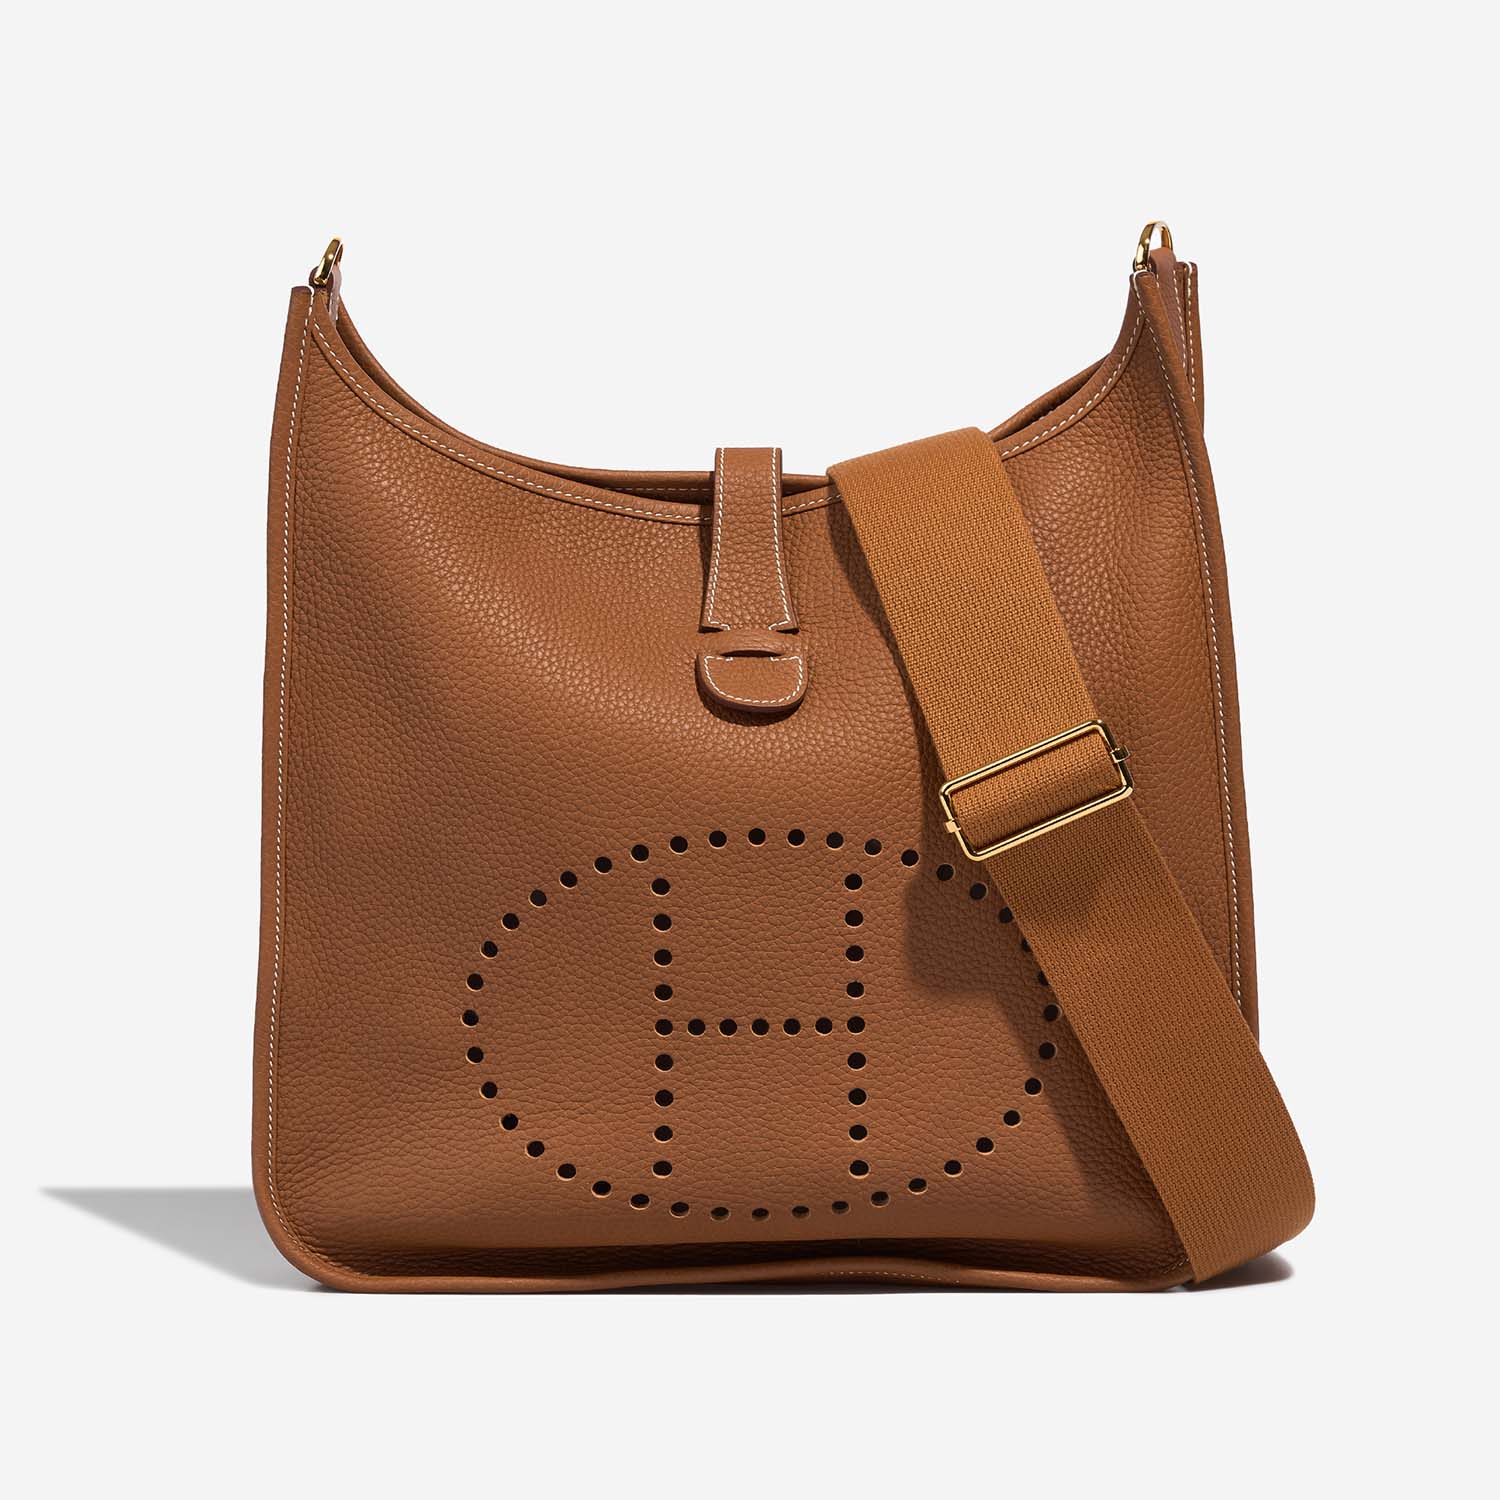 HERMES EVELYNE III 33 GOLD COLOUR TAURILLION CLEMENCE LEATHER